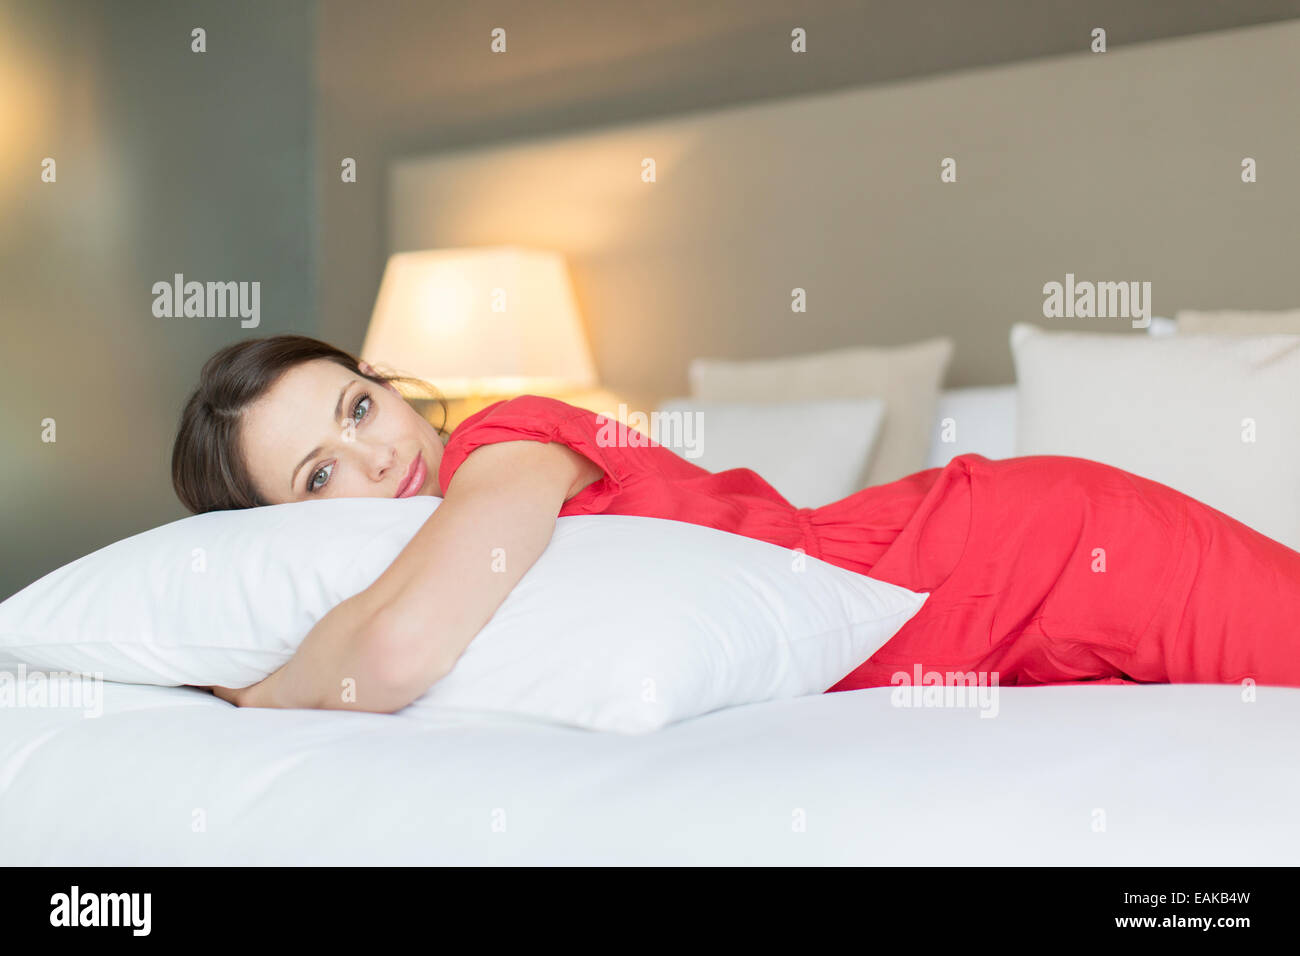 Portrait of beautiful woman wearing red dress lying on bed and hugging pillow Stock Photo